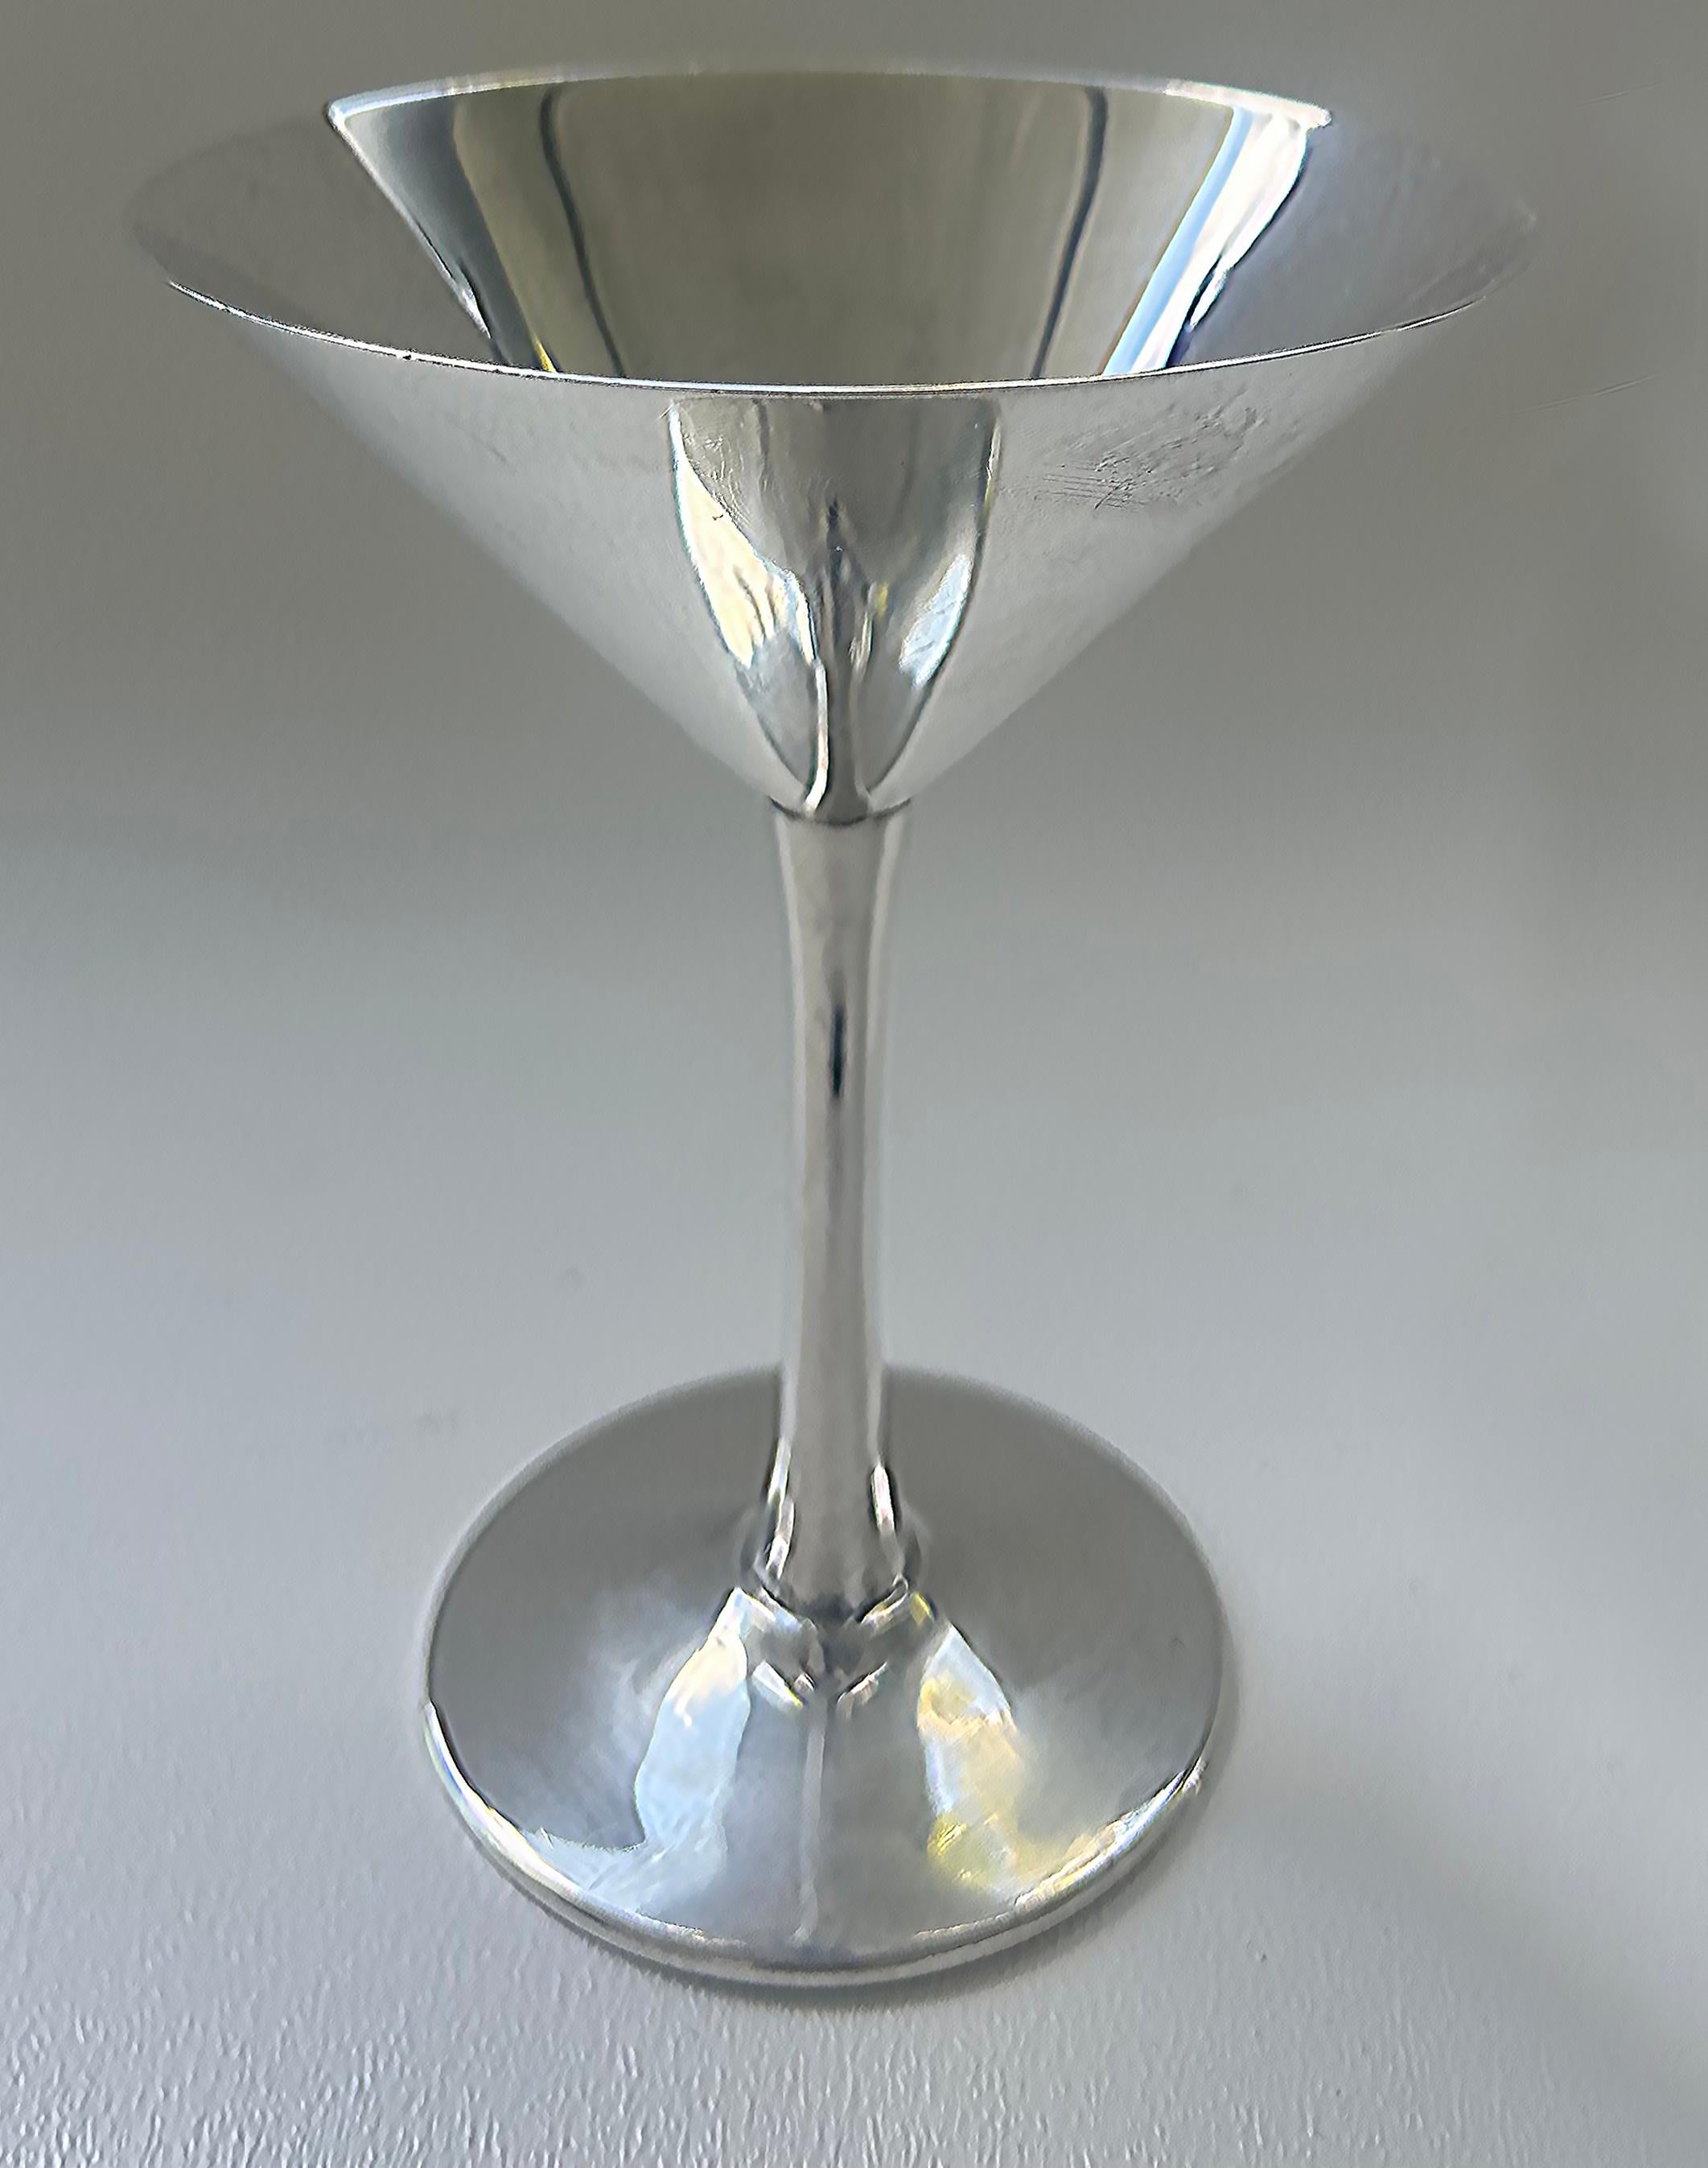 Cartier France Stamped 925 Sterling Silver Martini Goblets- A Pair

Offered for sale is a pair of 925 sterling silver martini glasses from Cartier. The goblets are signed Cartier Sterling on the bases as shown.